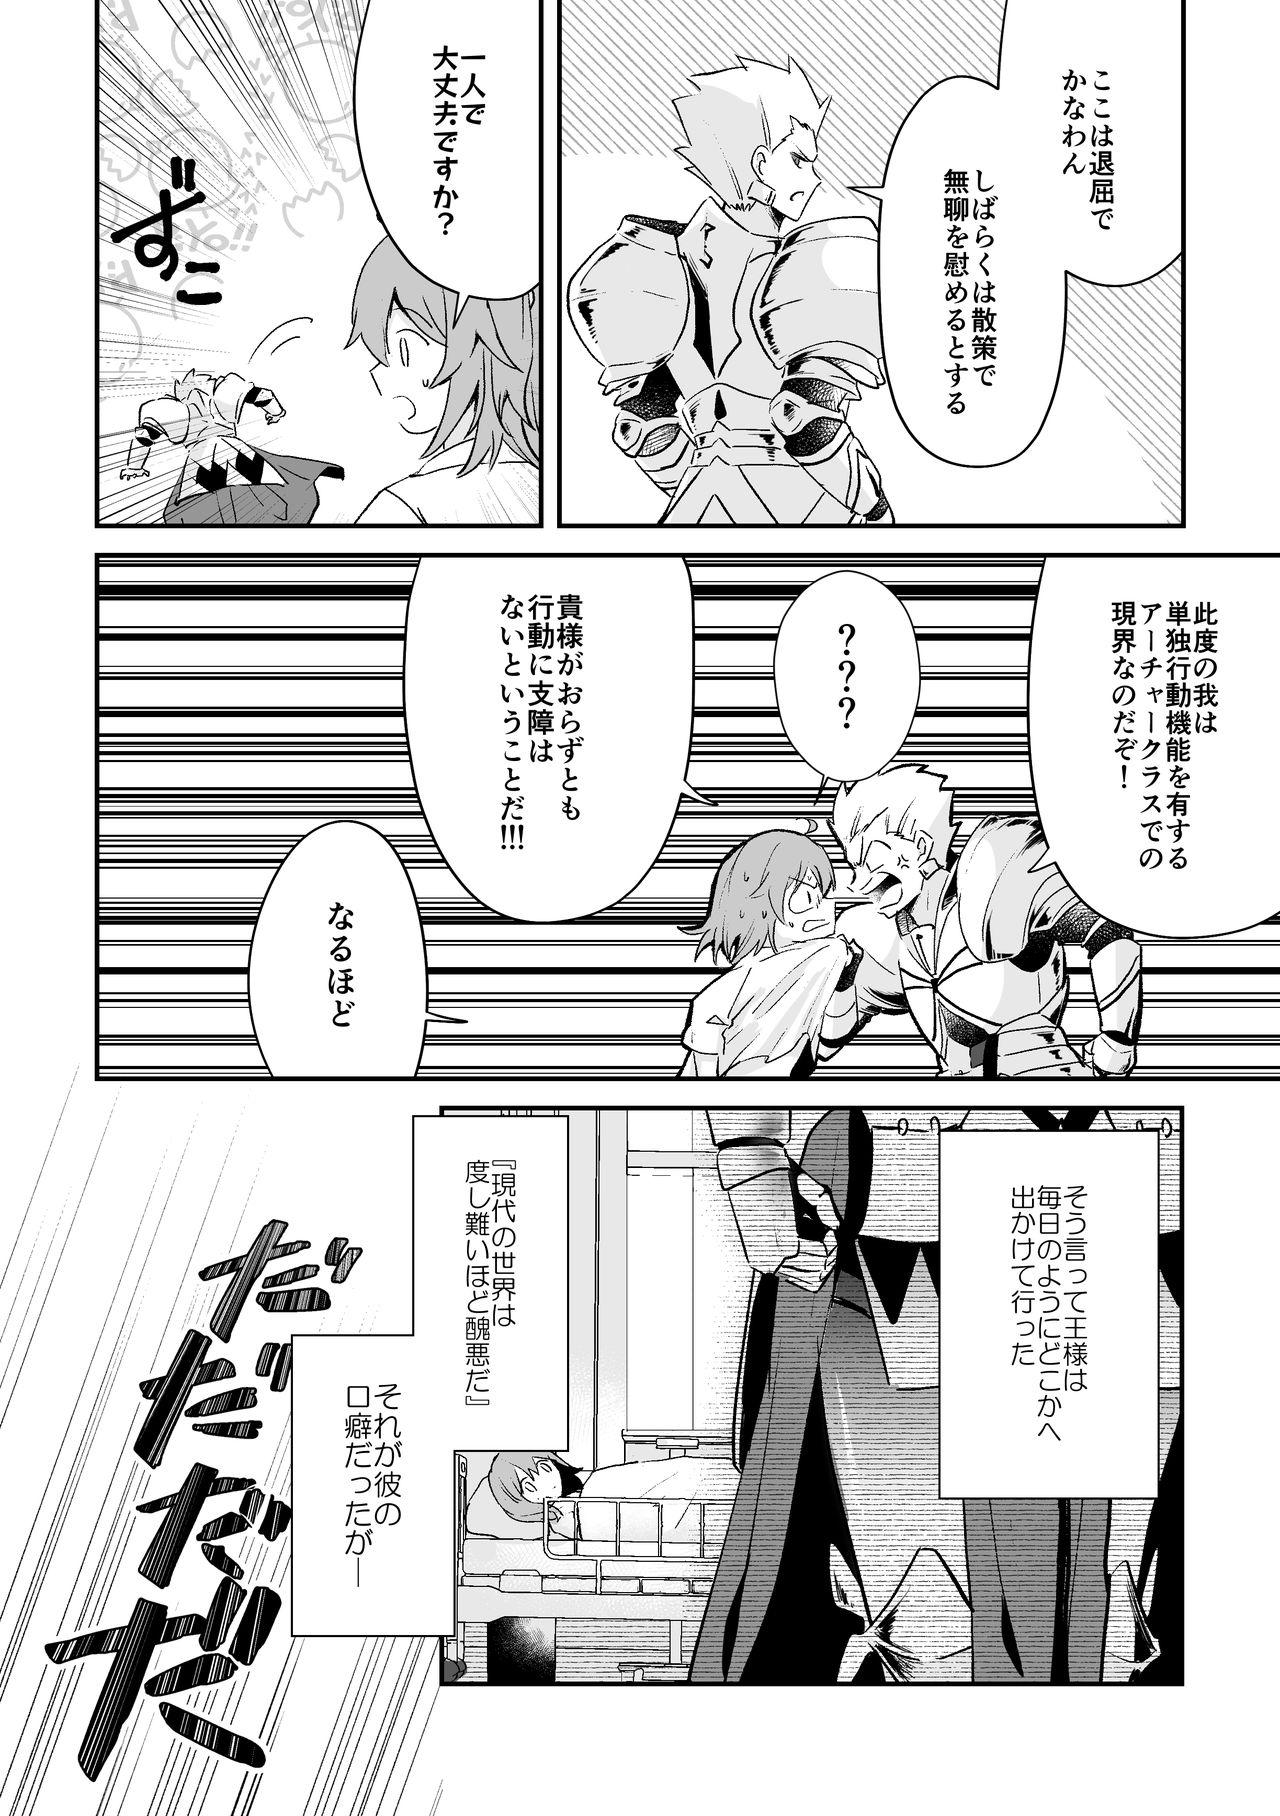 Stepfather Yomei Ichinen no Master 2 - Fate grand order Doublepenetration - Page 2